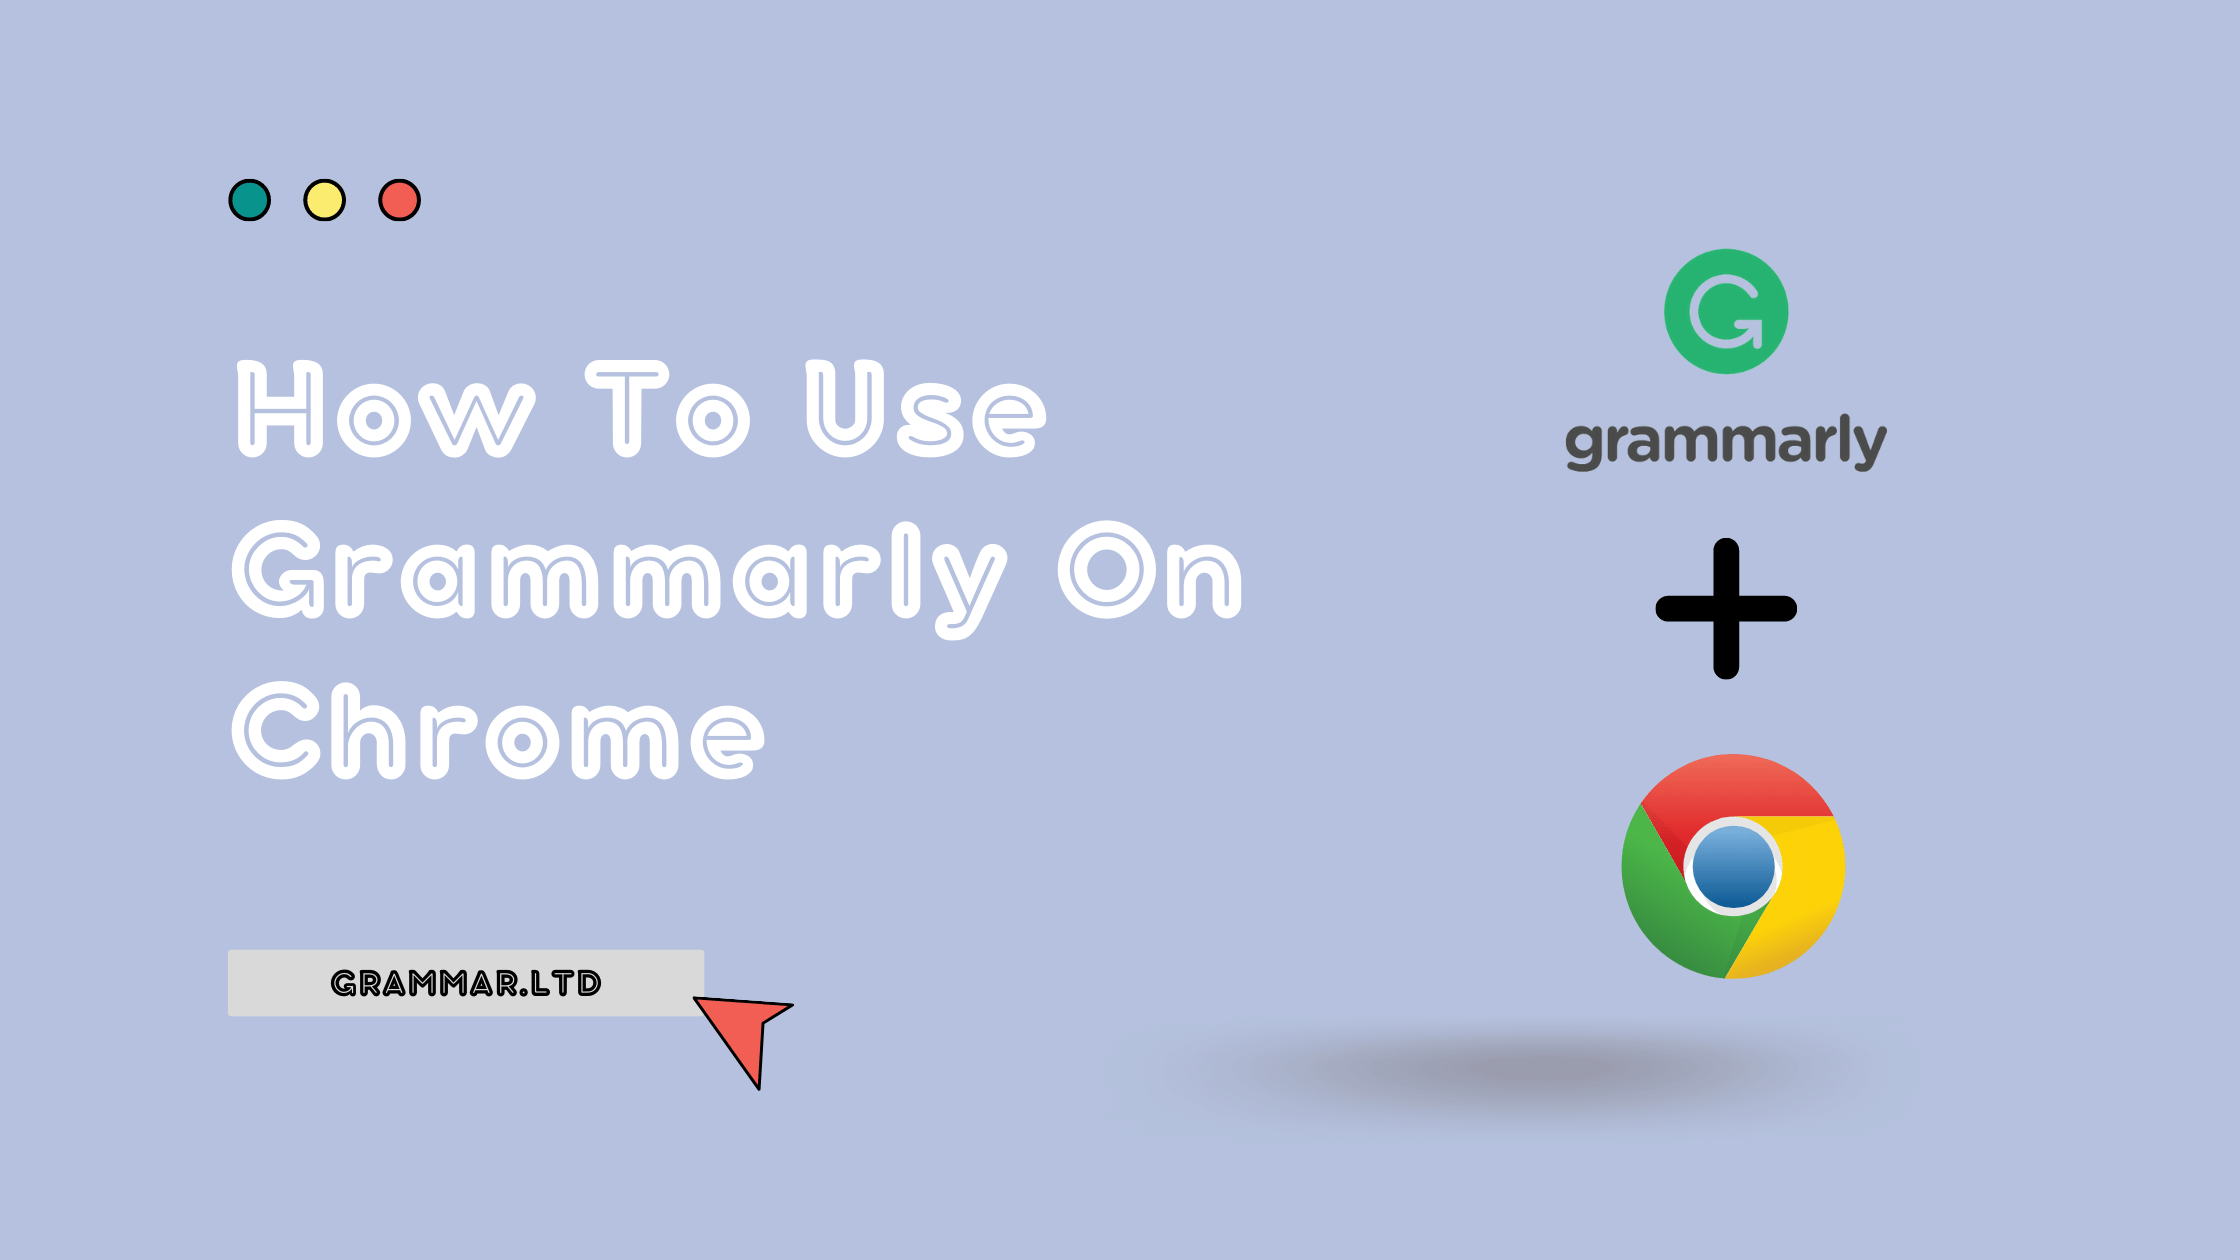 is grammarly free on chrome